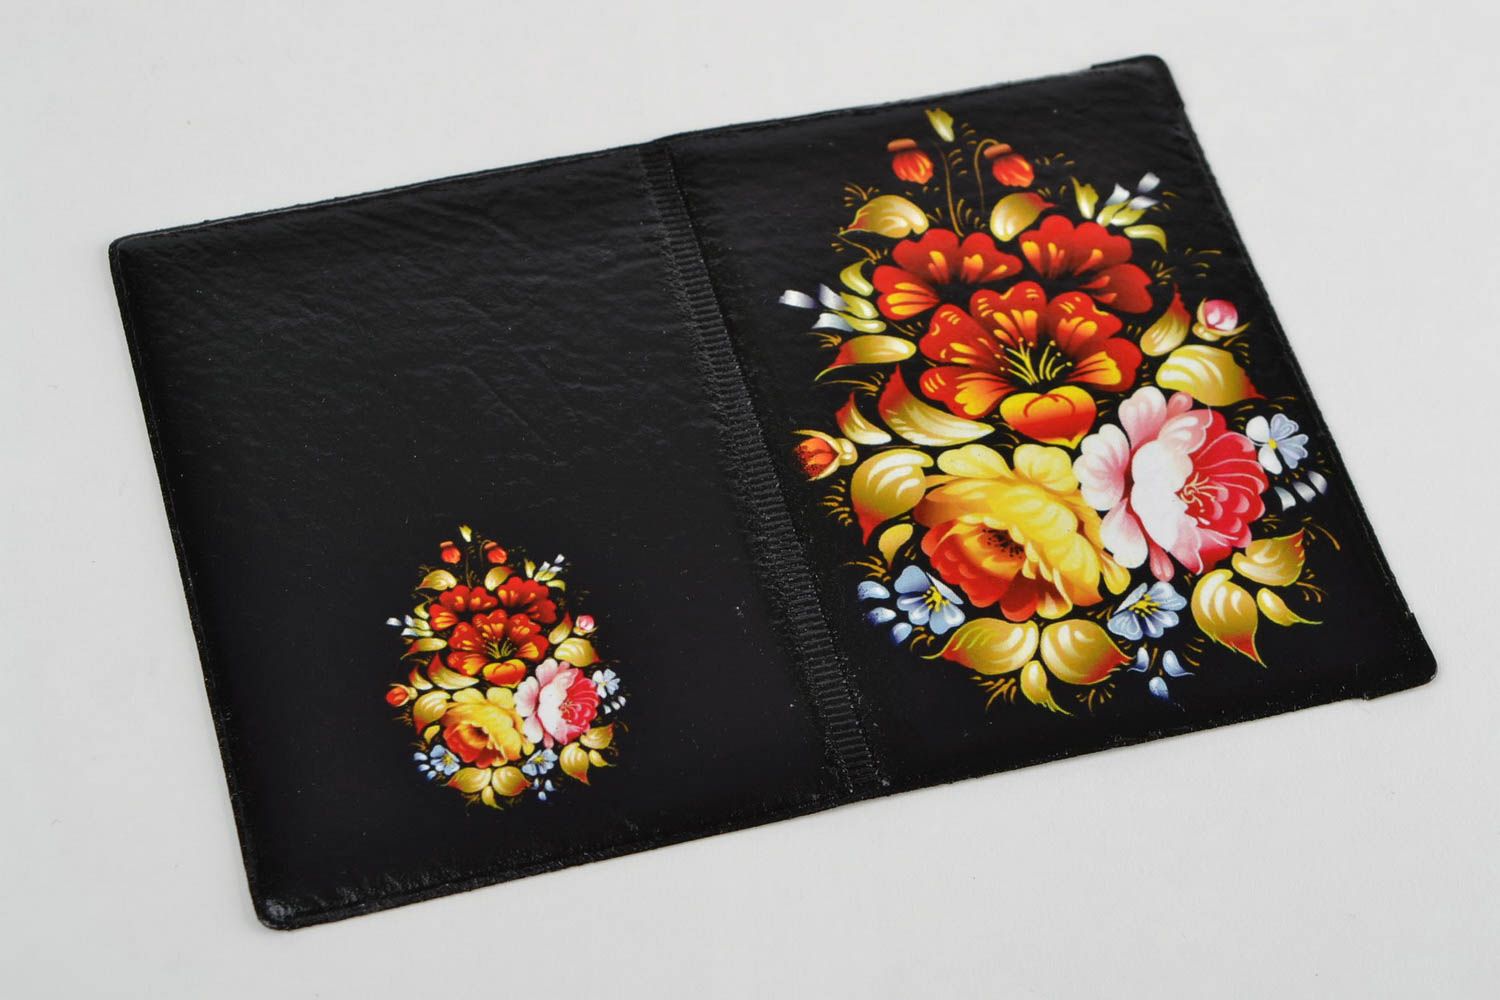 Handmade black faux leather passport cover with decoupage image bright flowers photo 3